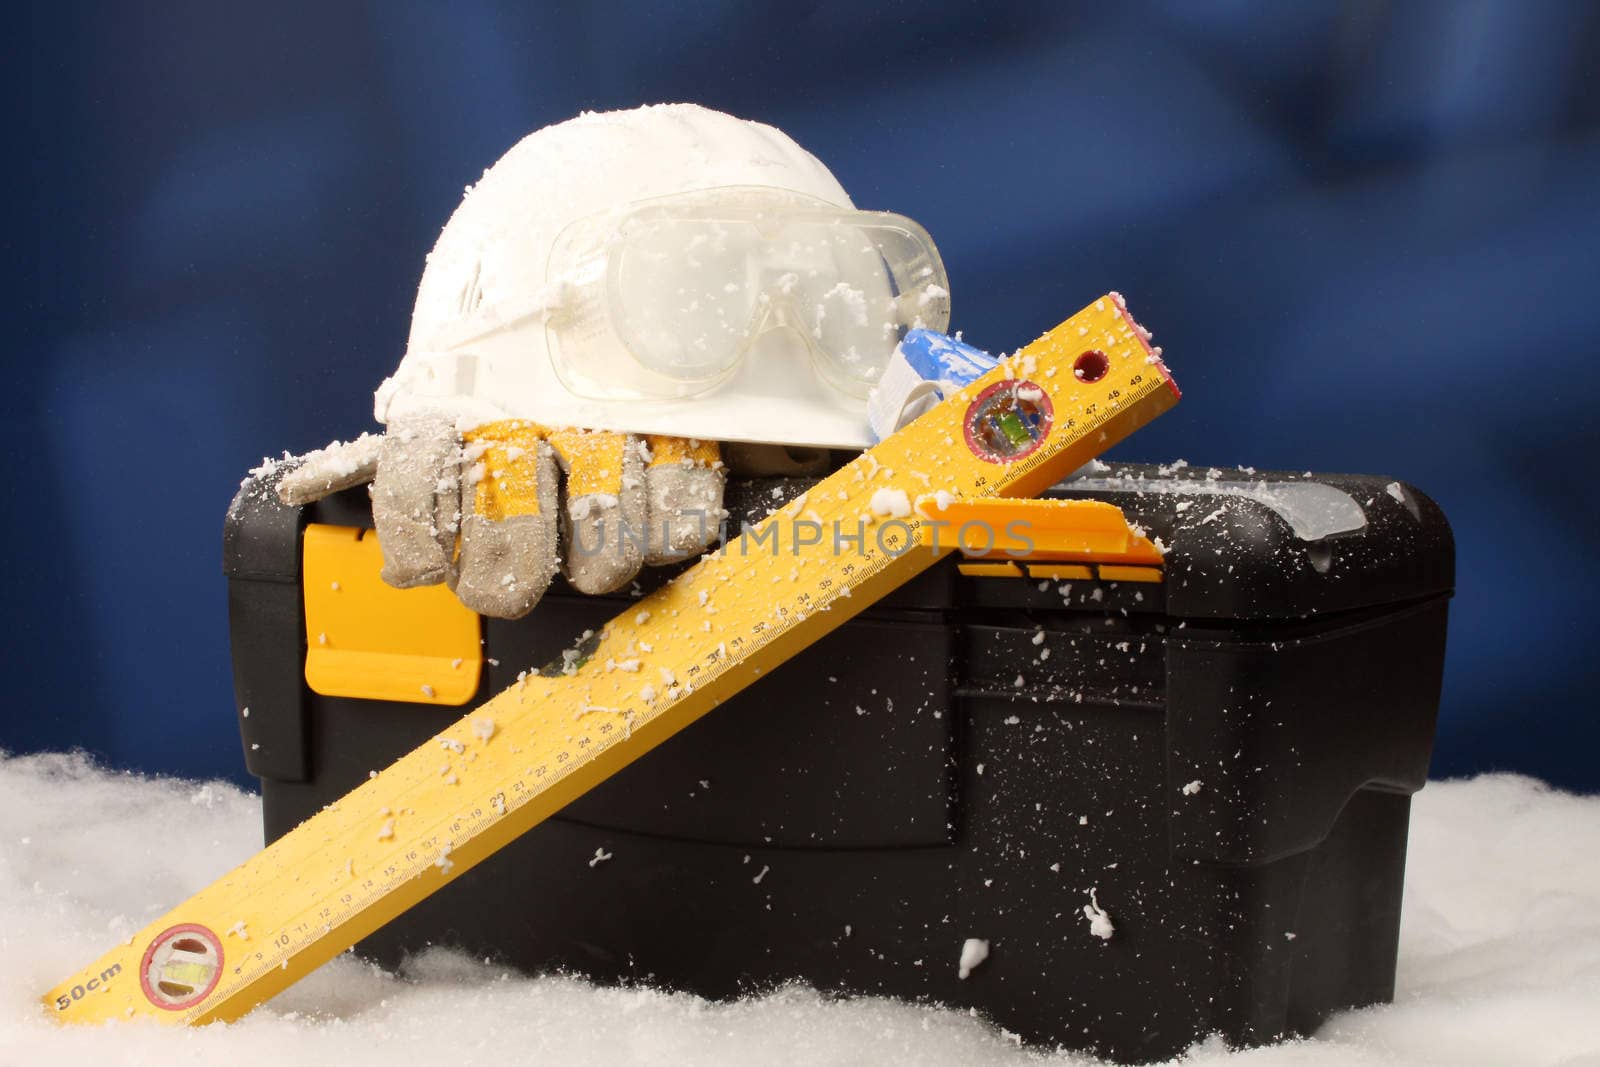 Safety New Year- protective equipment on artificial snow